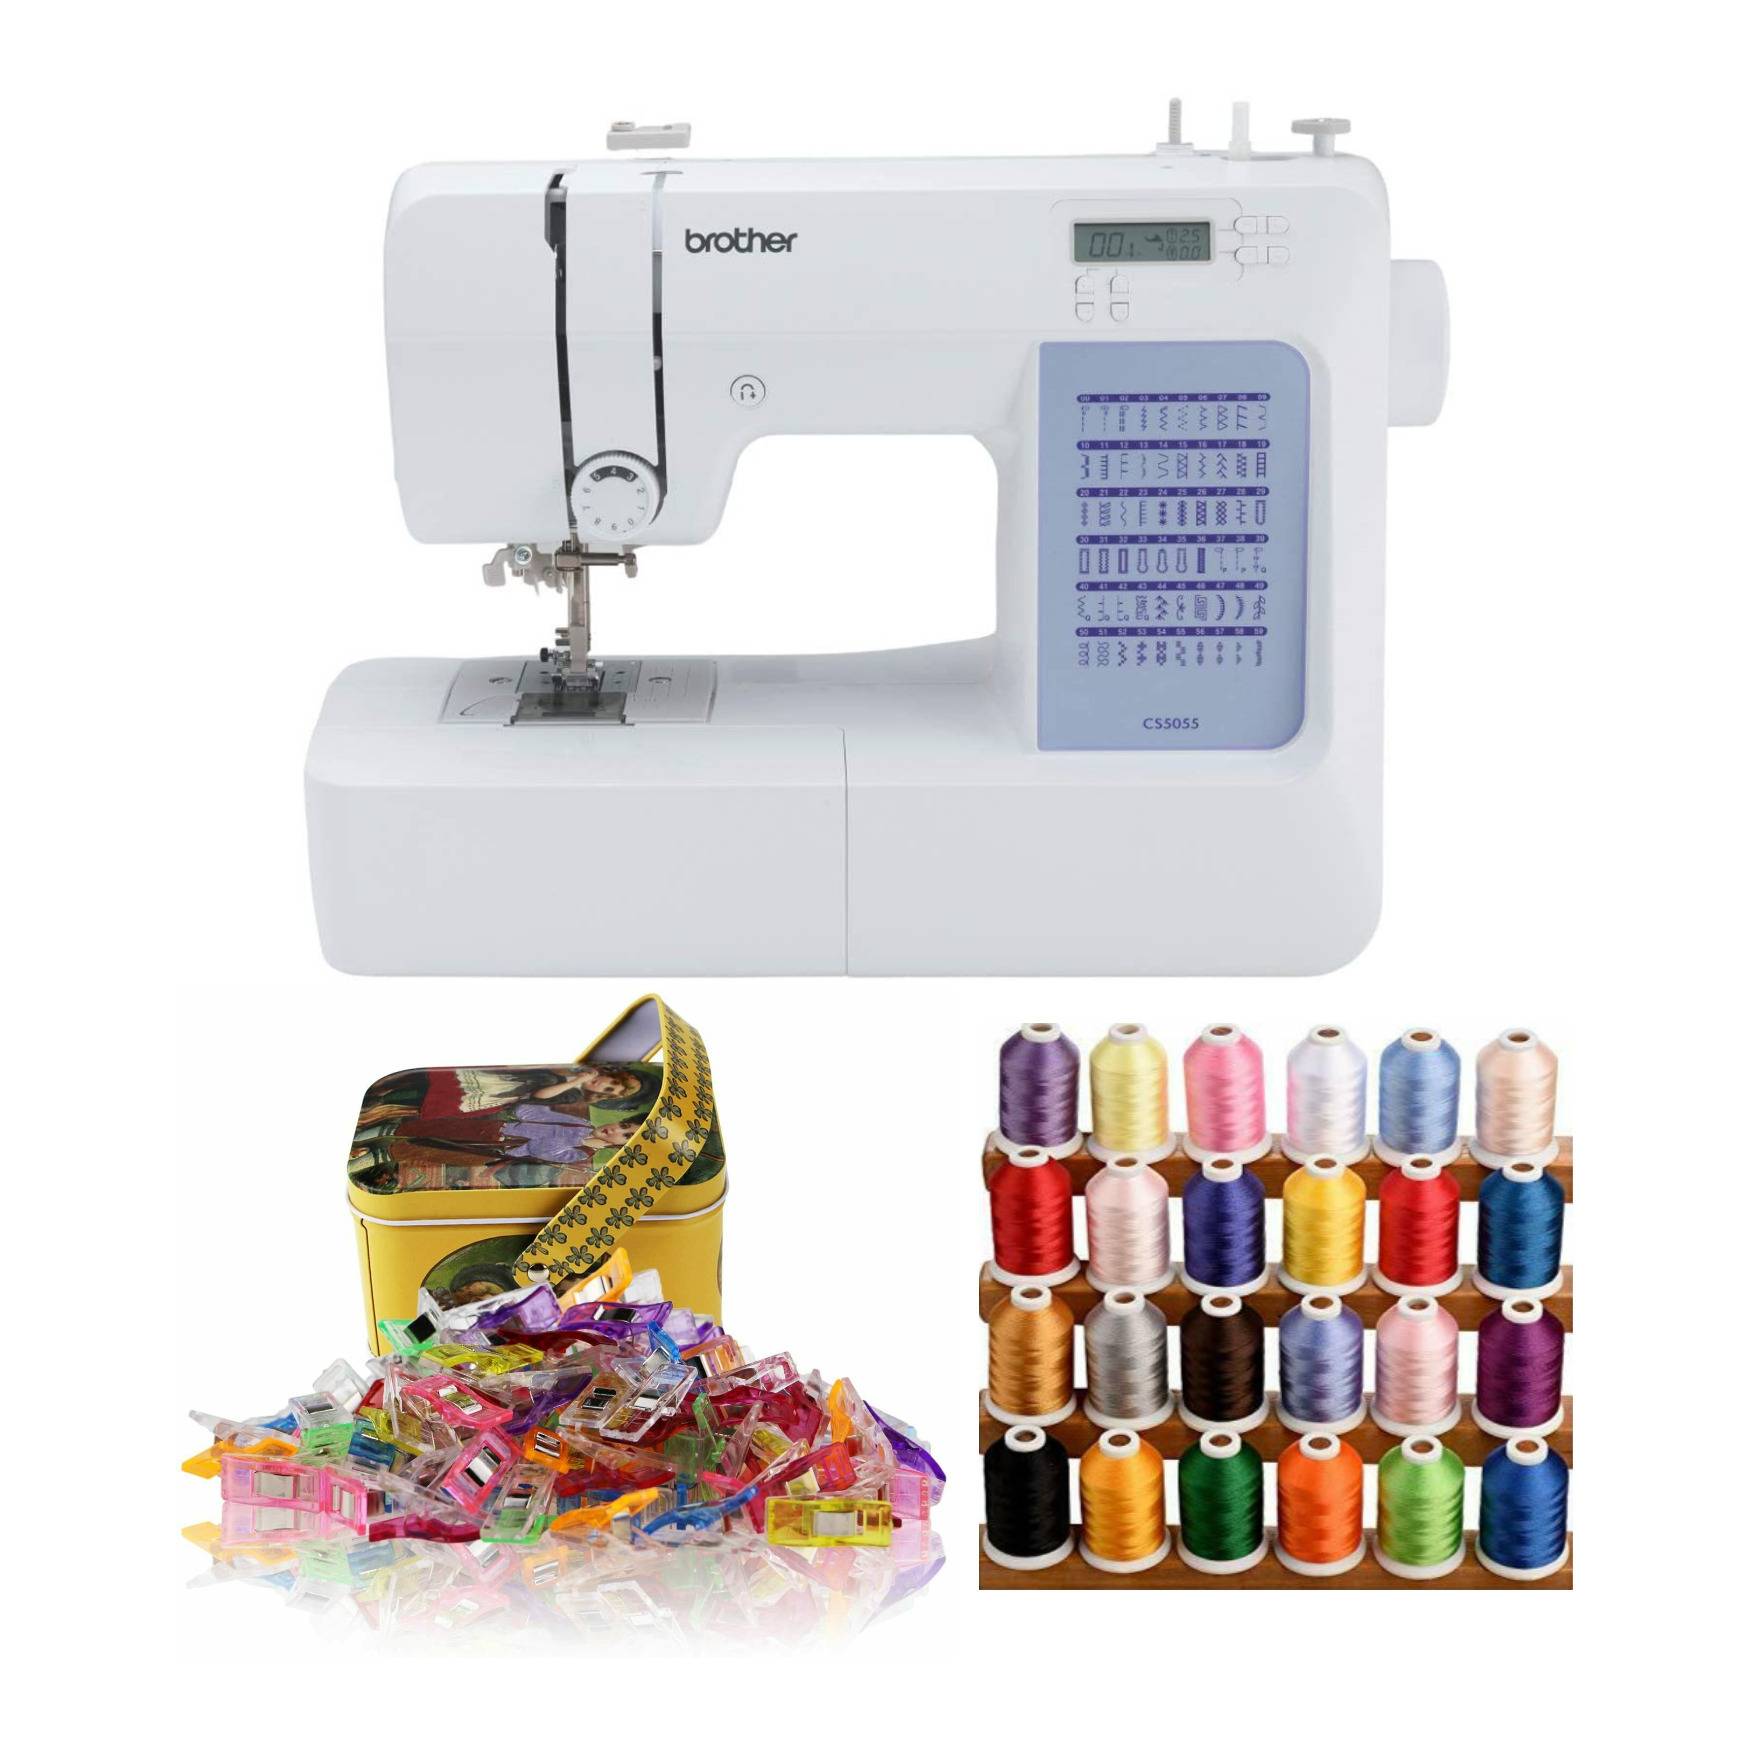 Brother CS5055 Sewing Machine (White) with 100 Sewing Clips, Tin Box and Polyester Embroidery Sewing Thread